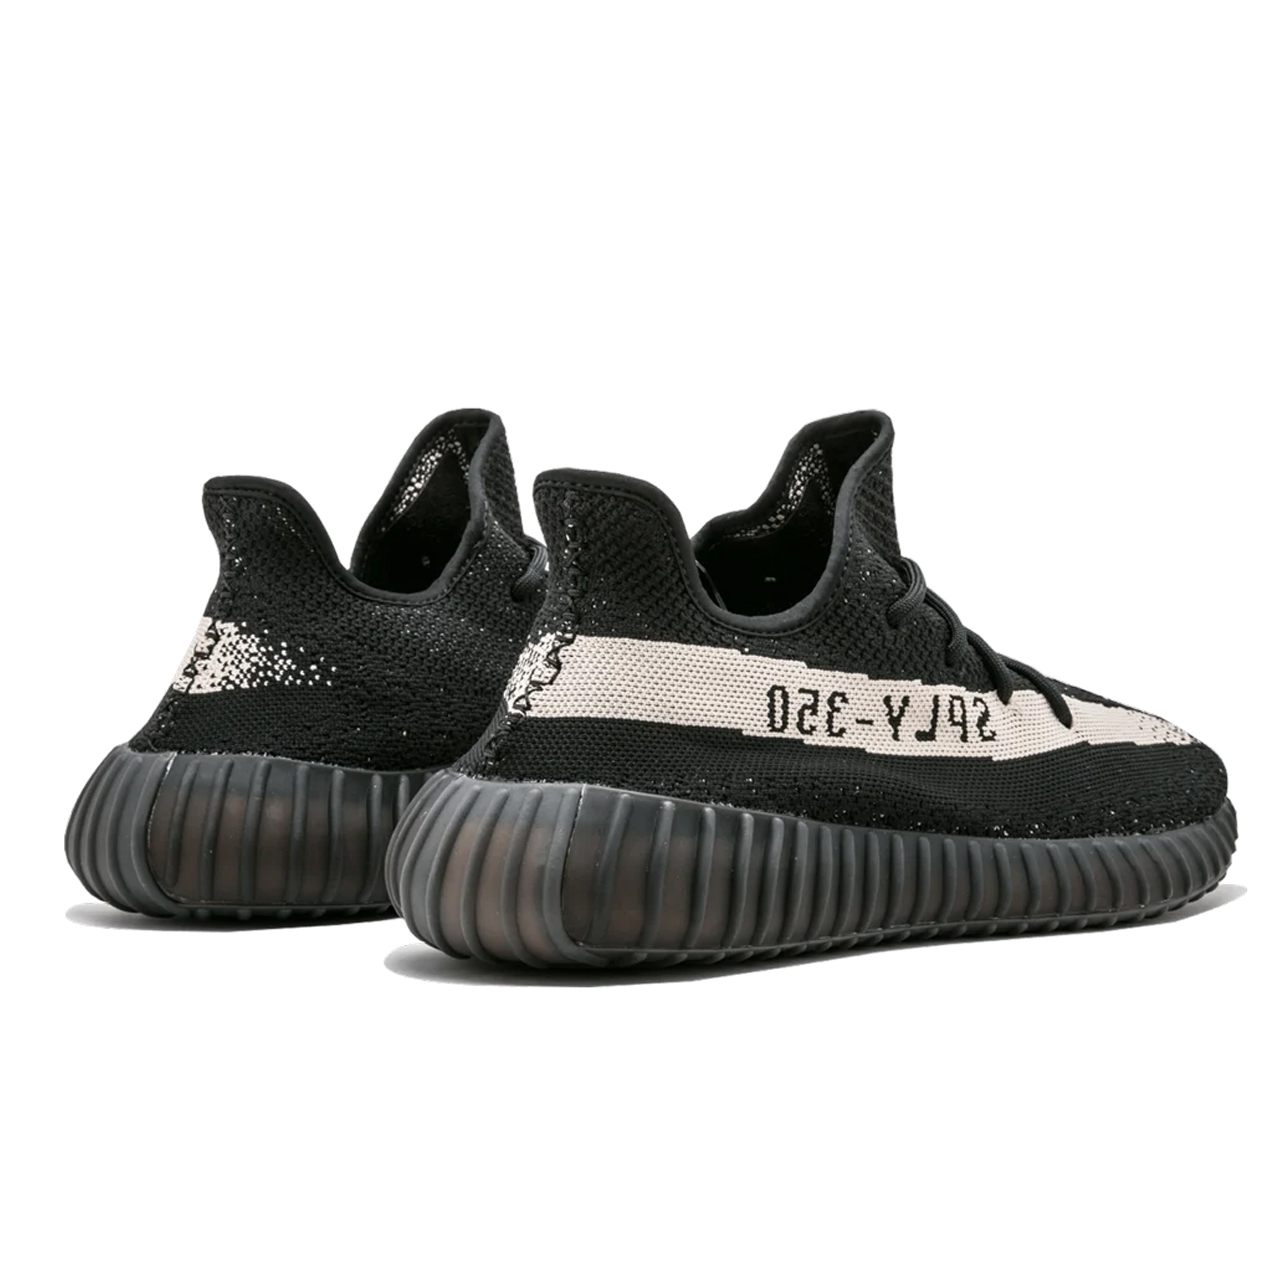 Cheap Ad Yeezy 350 Boost V2 Men Aaa Quality092